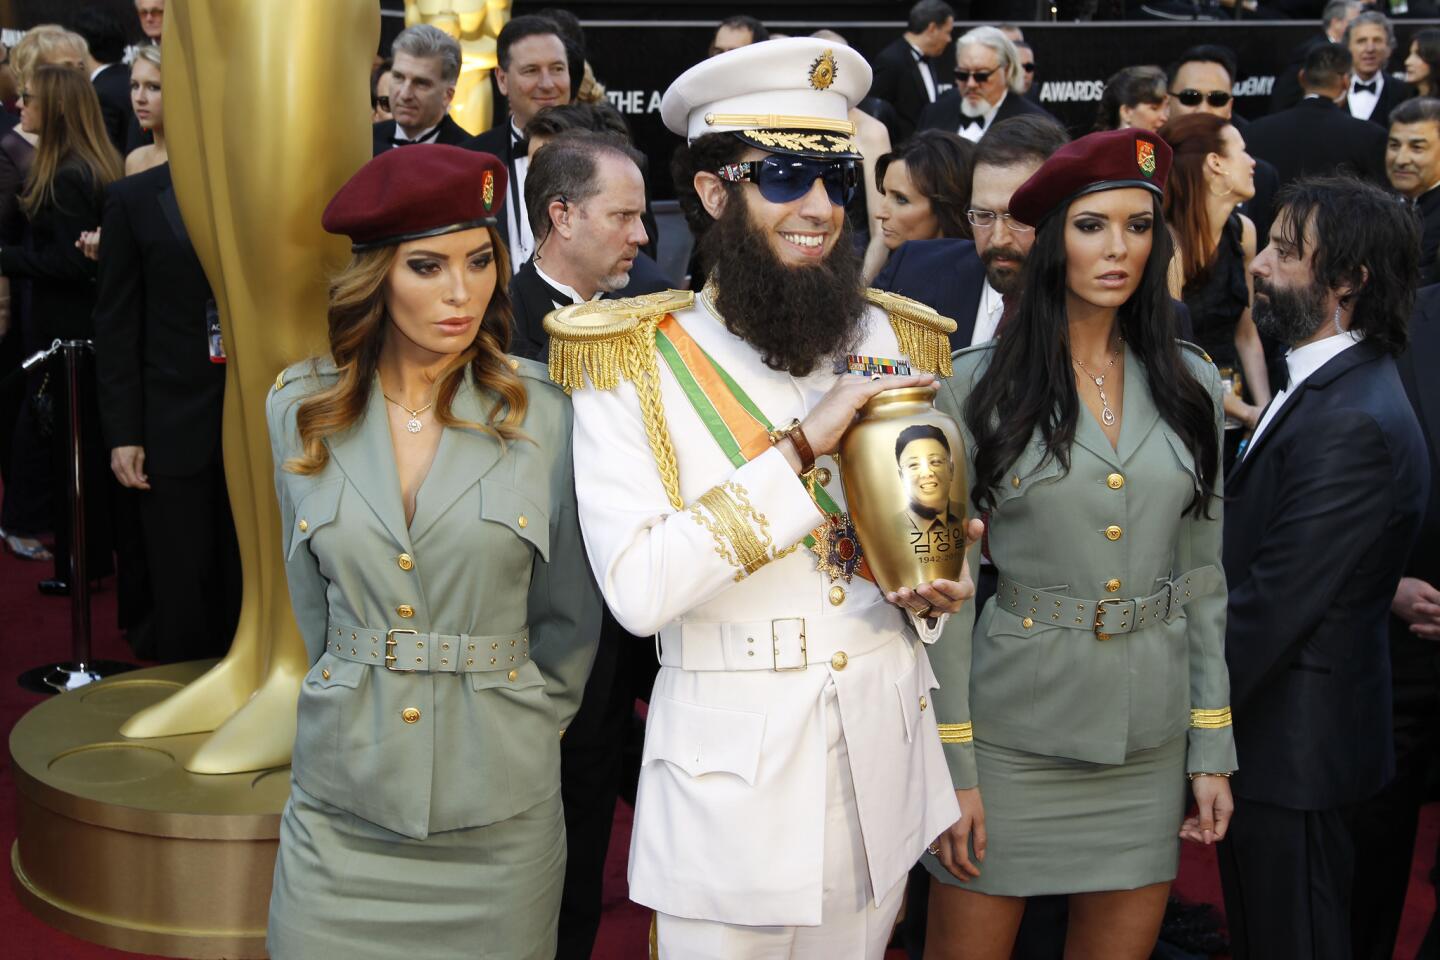 Sacha Baron Cohen walked the red carpet of the 84th Academy Awards in character as General Aladeen from his film "The Dictator." He also carried a gold urn he claimed contained the ashes of former North Korean leader Kim Jong-Il, which he dumped over Ryan Seacrest.